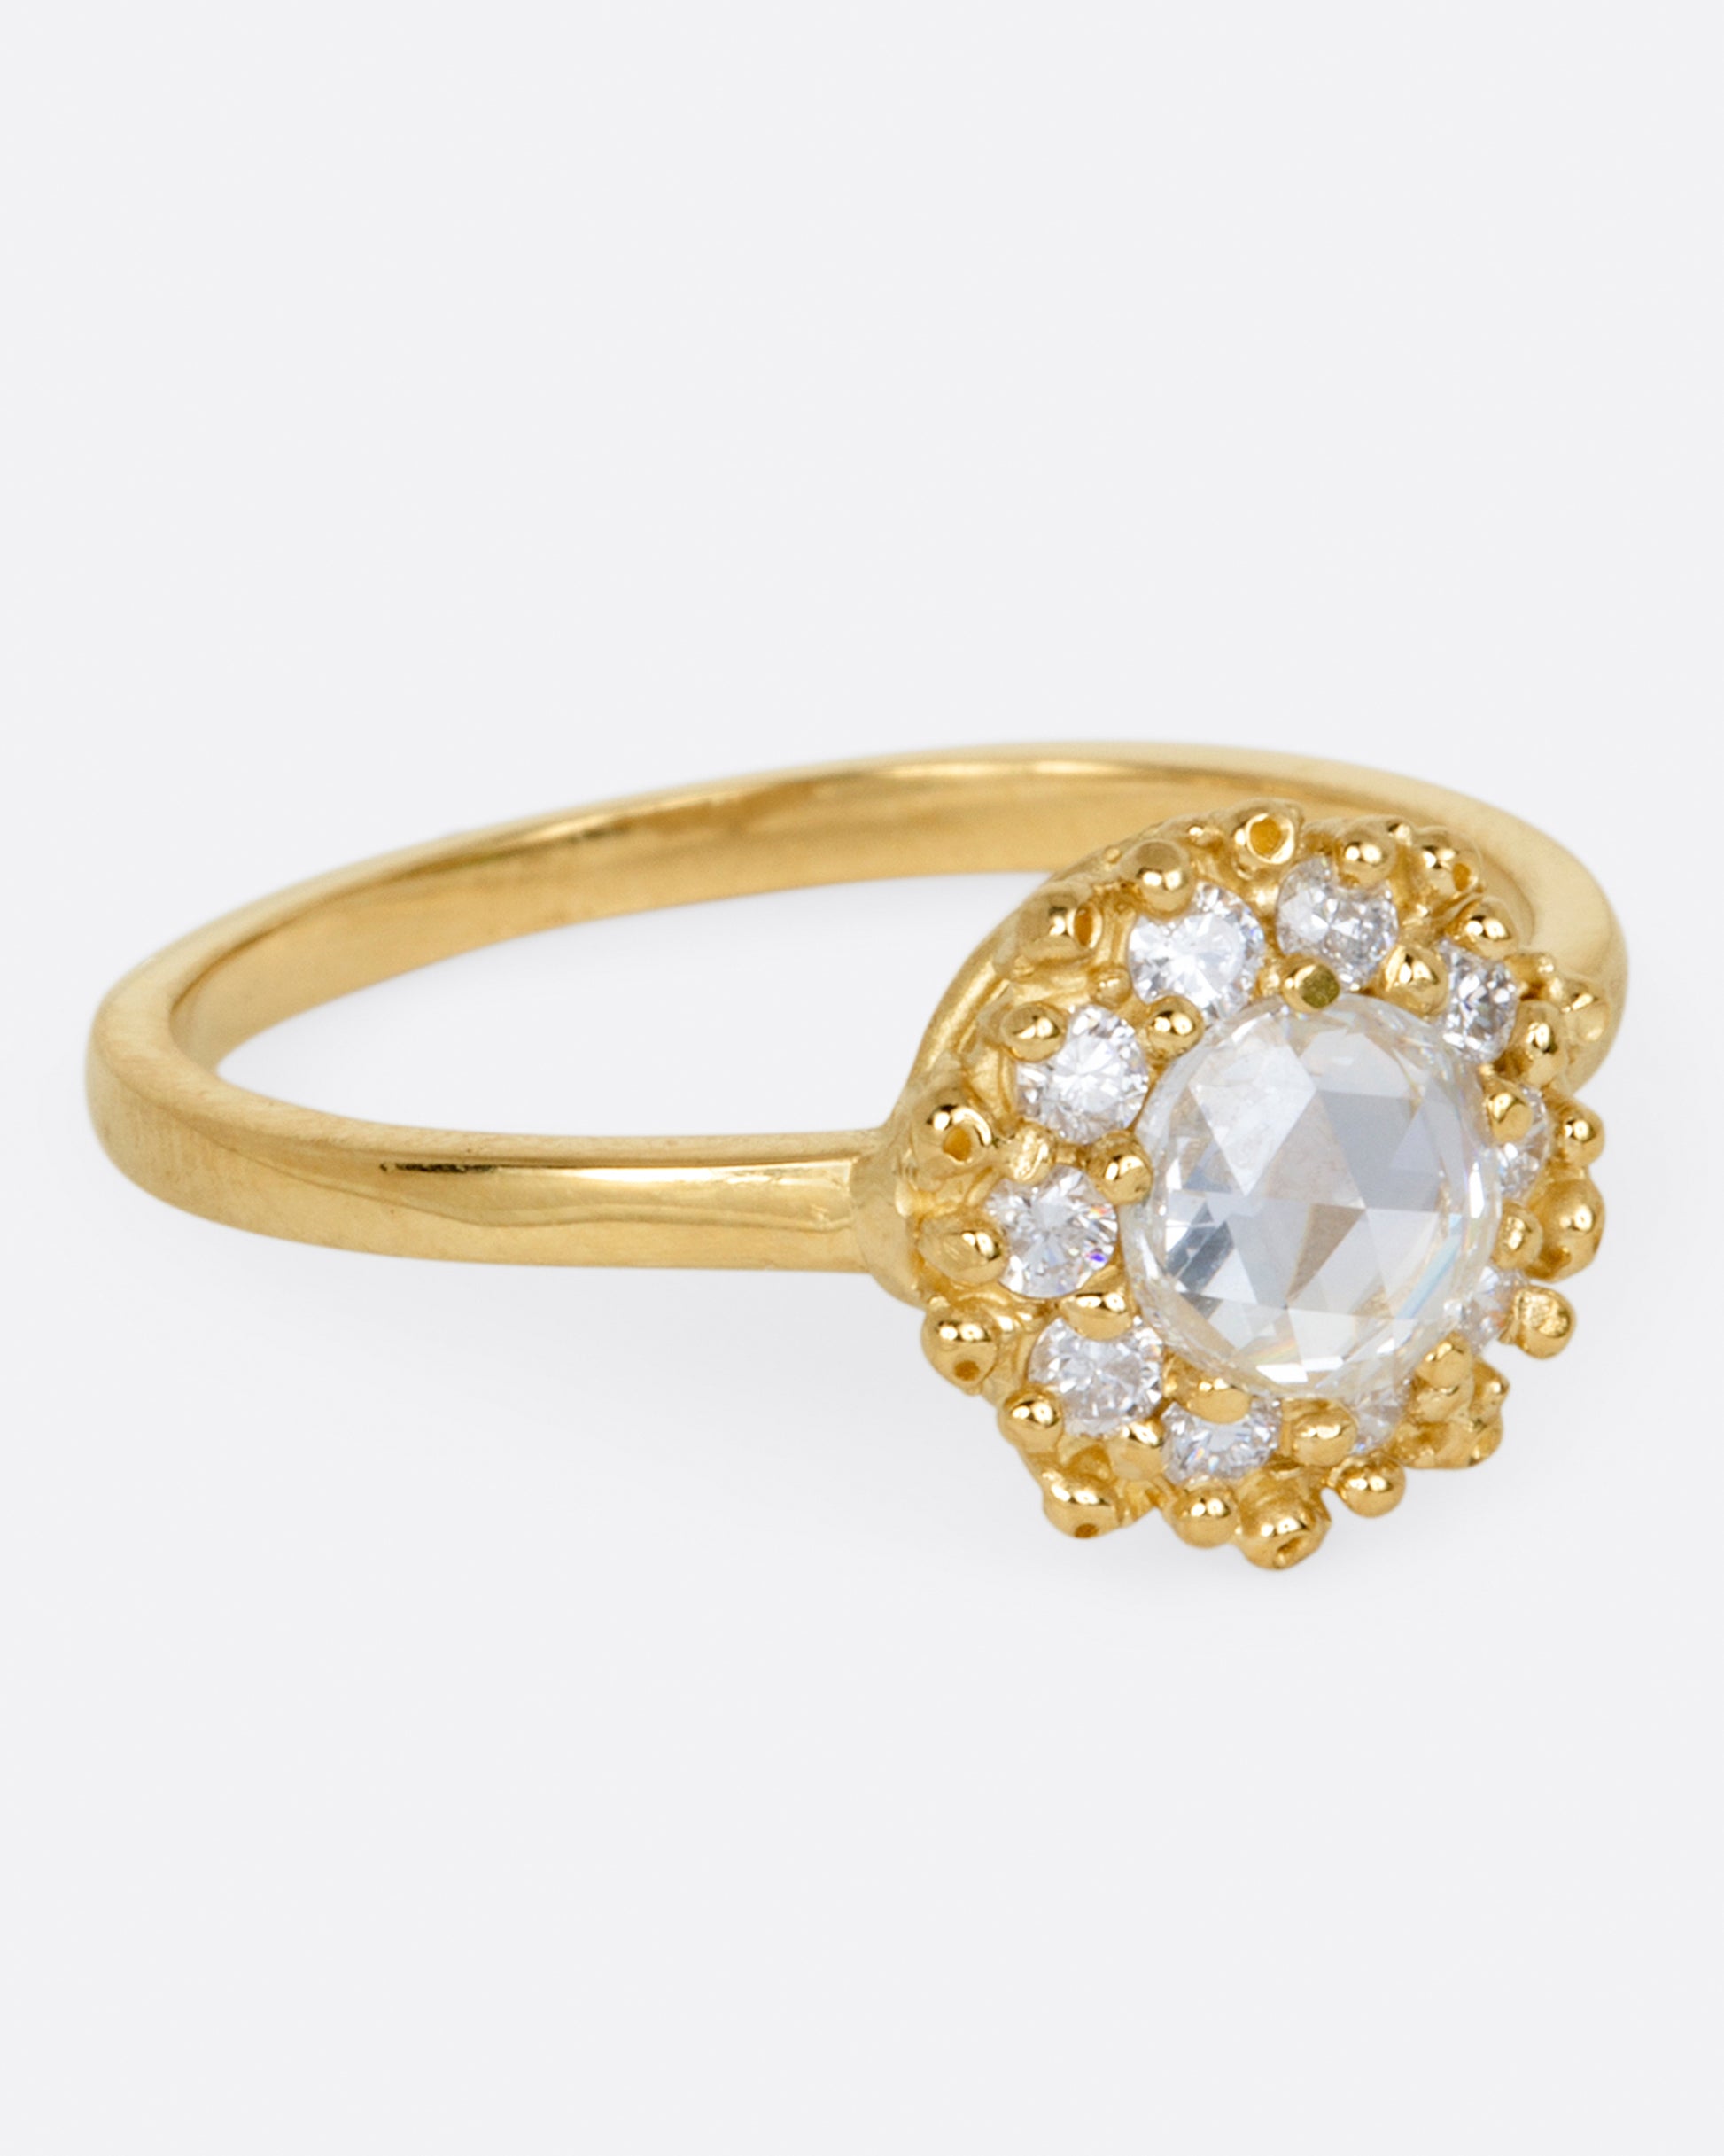 A rose cut round diamond ring with a halo of smaller round brilliant cut diamonds.